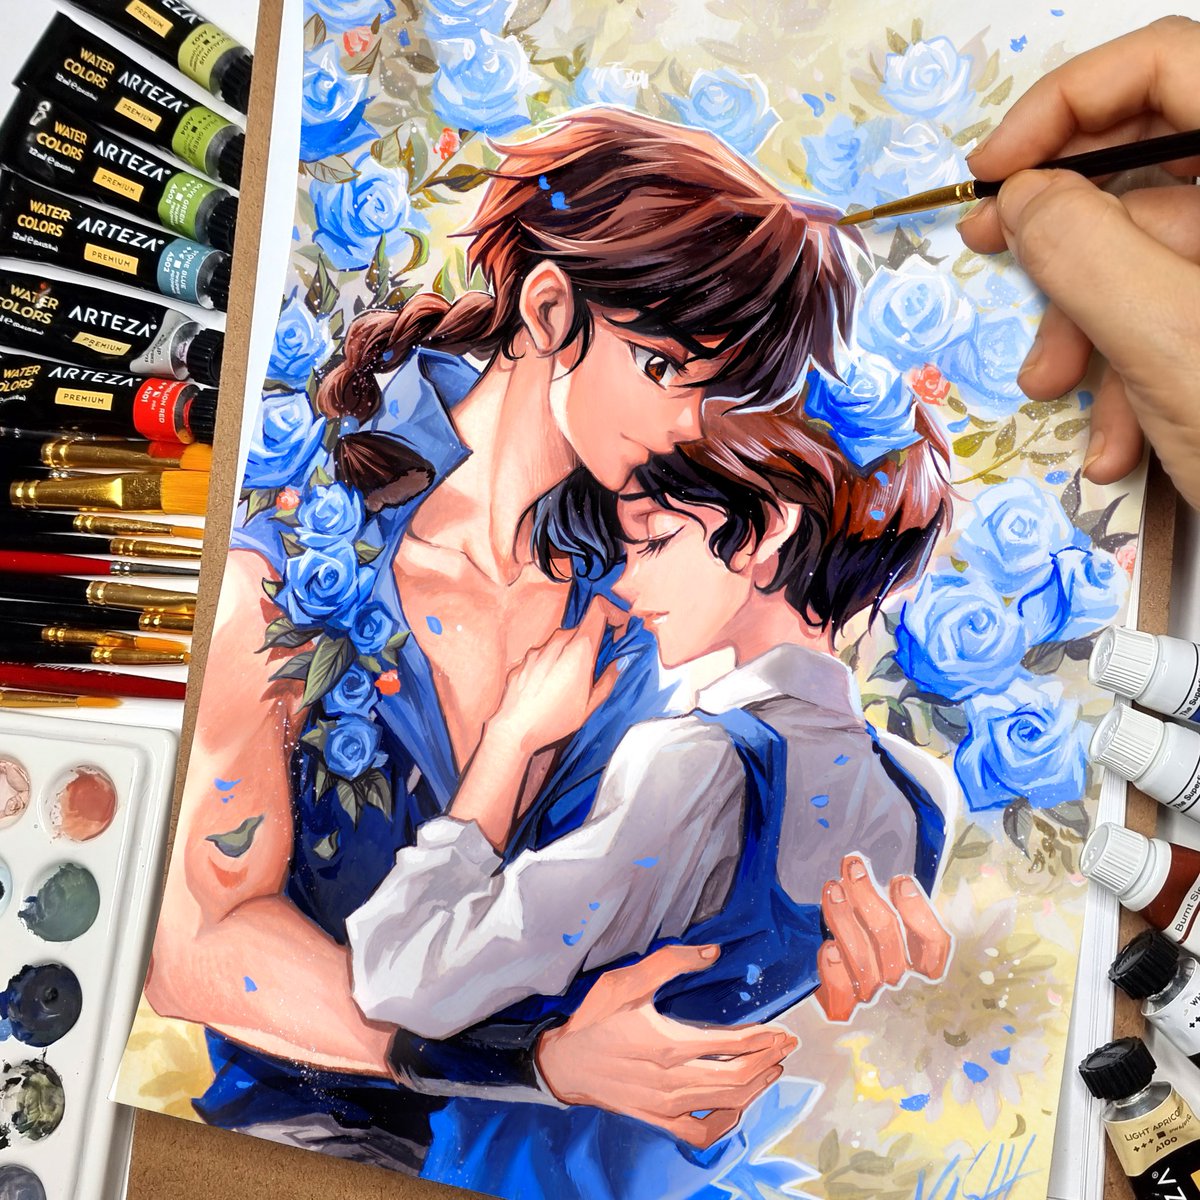 💐Happy Valentines day 💐
This painting of Ranma & Akane is done with Turner Design #Gouache & Arteza #Watercolors All this time in the #Manga #Ranma & Akane didn't had a real romantic scene so i wanted to paint them.
#akanetendo #comicart #mangapainting #anime #rumikotakahashi